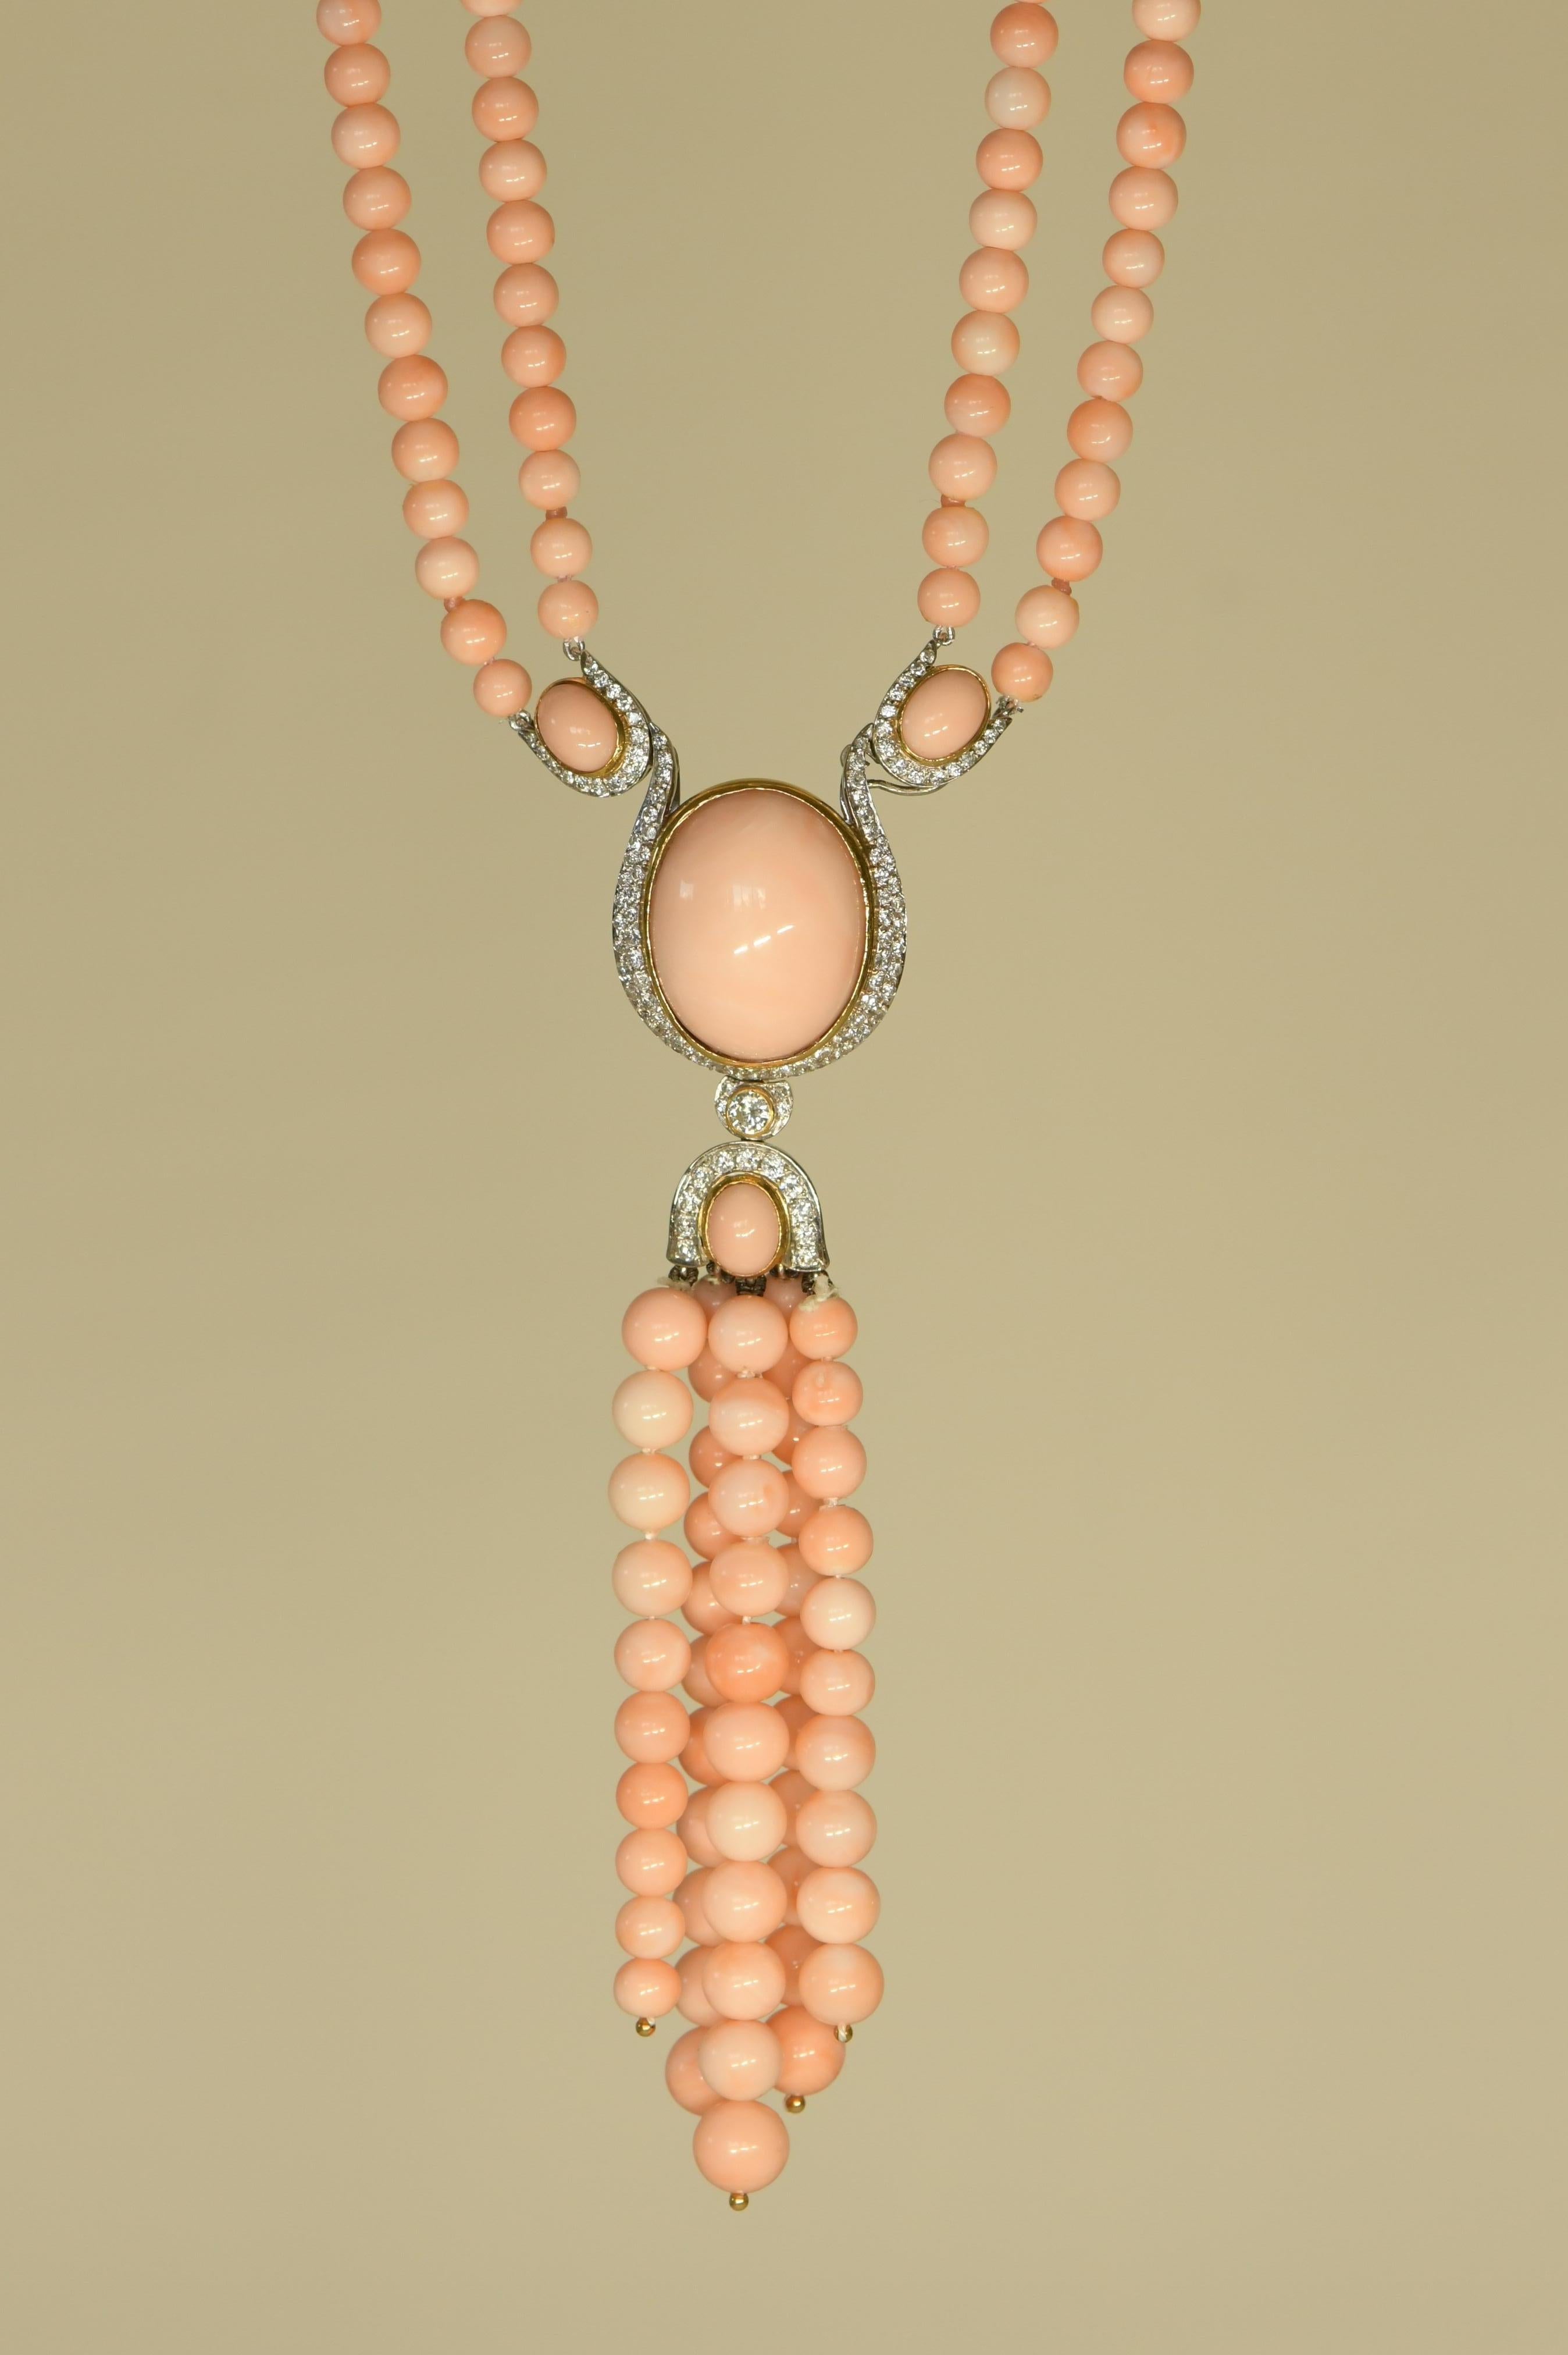 This is a lovely multi-strand vintage Pink Peach Coral Necklace with a Coral Pendant featuring large cabochon Coral separating the multi coral strands for a really elegant look. 

The luscious and glossy gems from the sea are a deep pink peachy